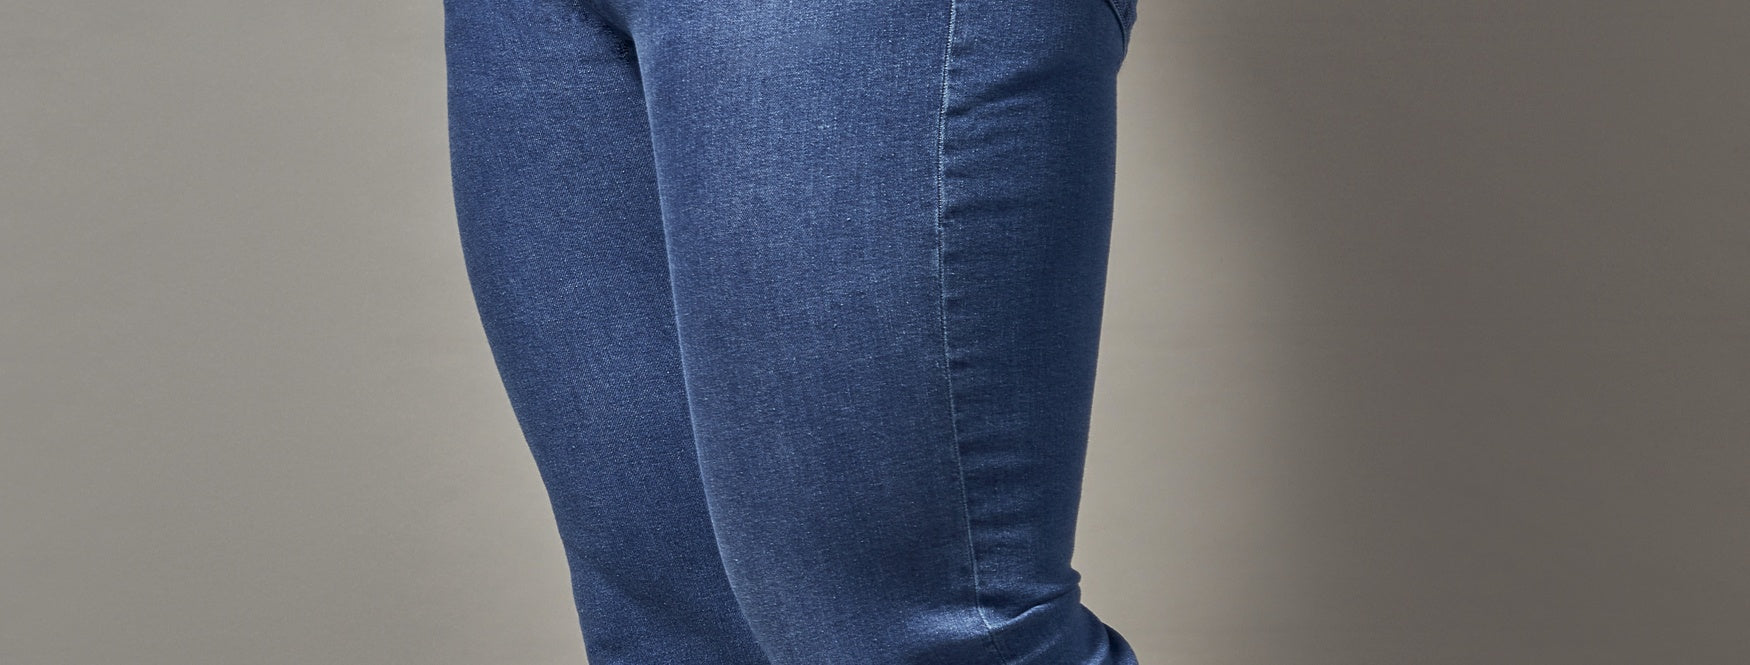 How To Get Chemical Smell Out Of Jeans By Tapered Menswear